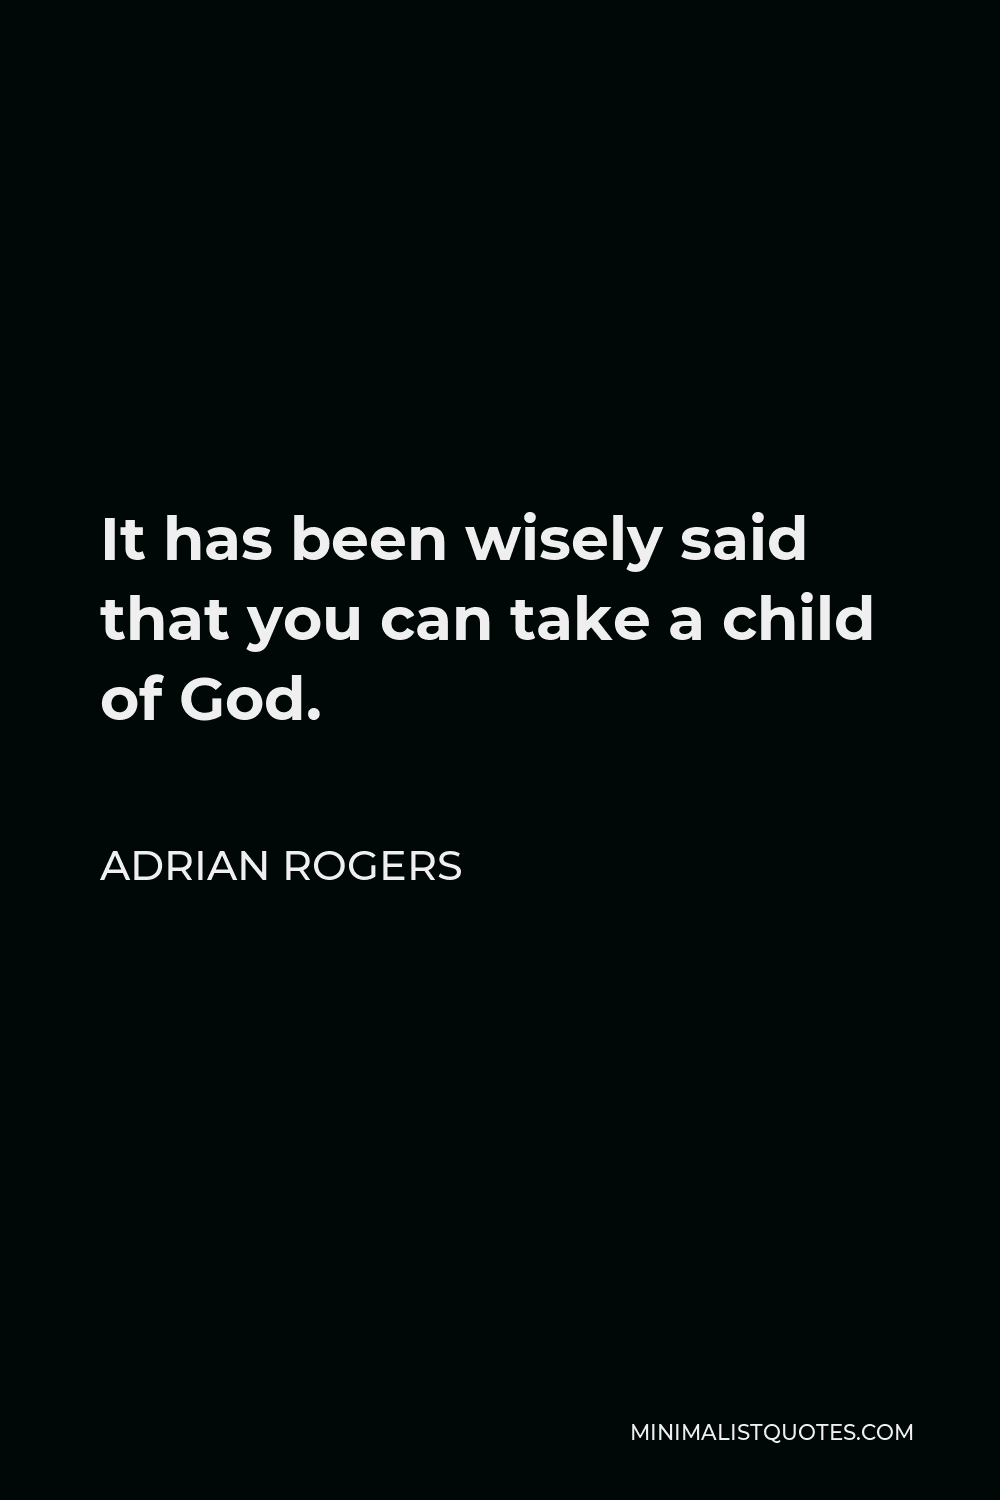 Adrian Rogers Quote - It has been wisely said that you can take a child of God.